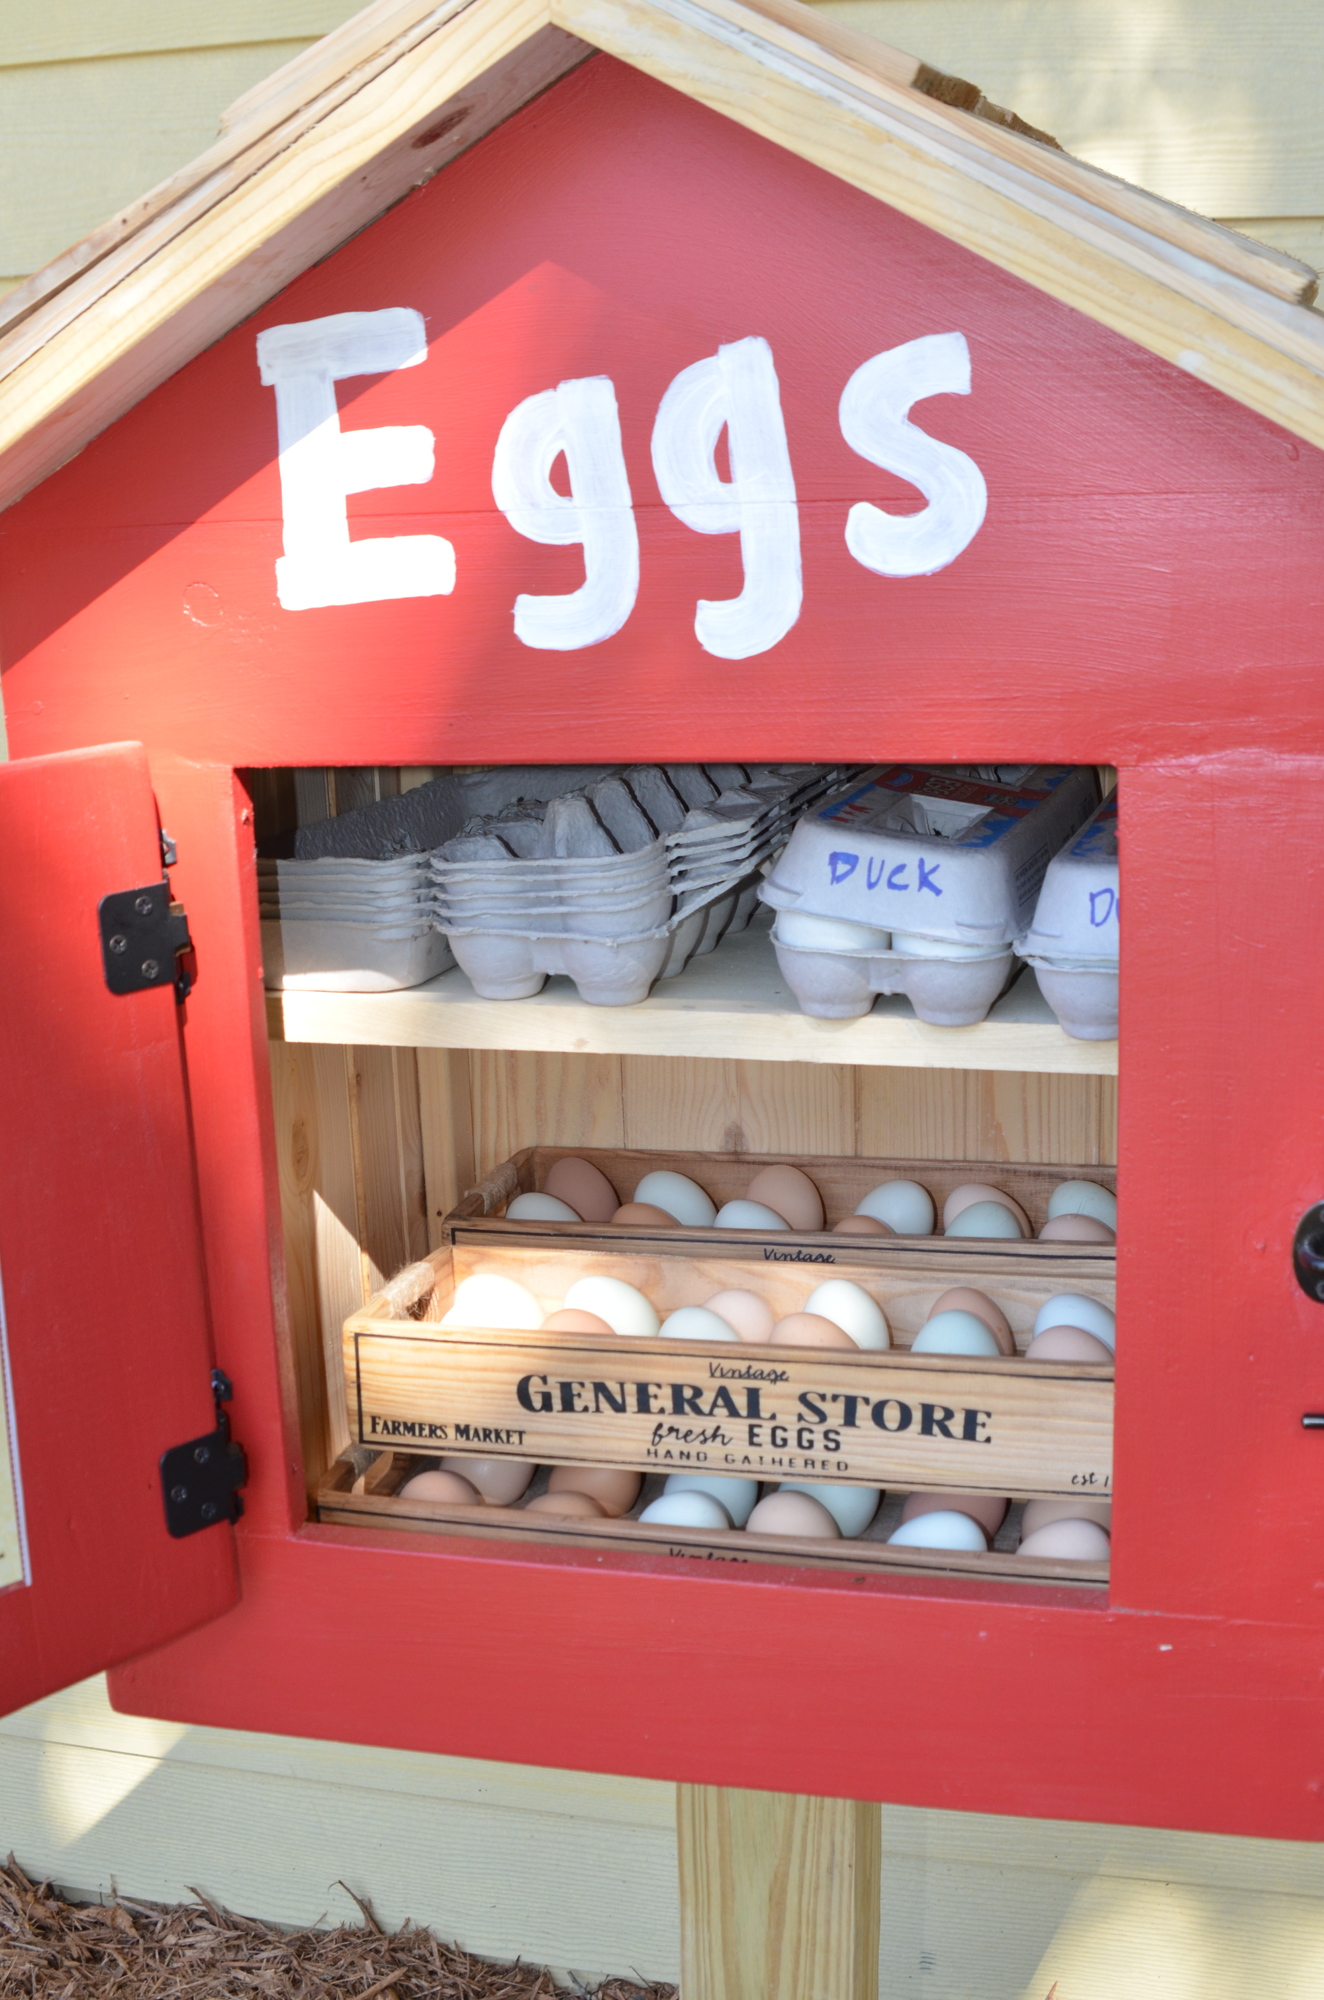 Tristan Milliken sells his eggs in an honor box in front of his home in Oakland.